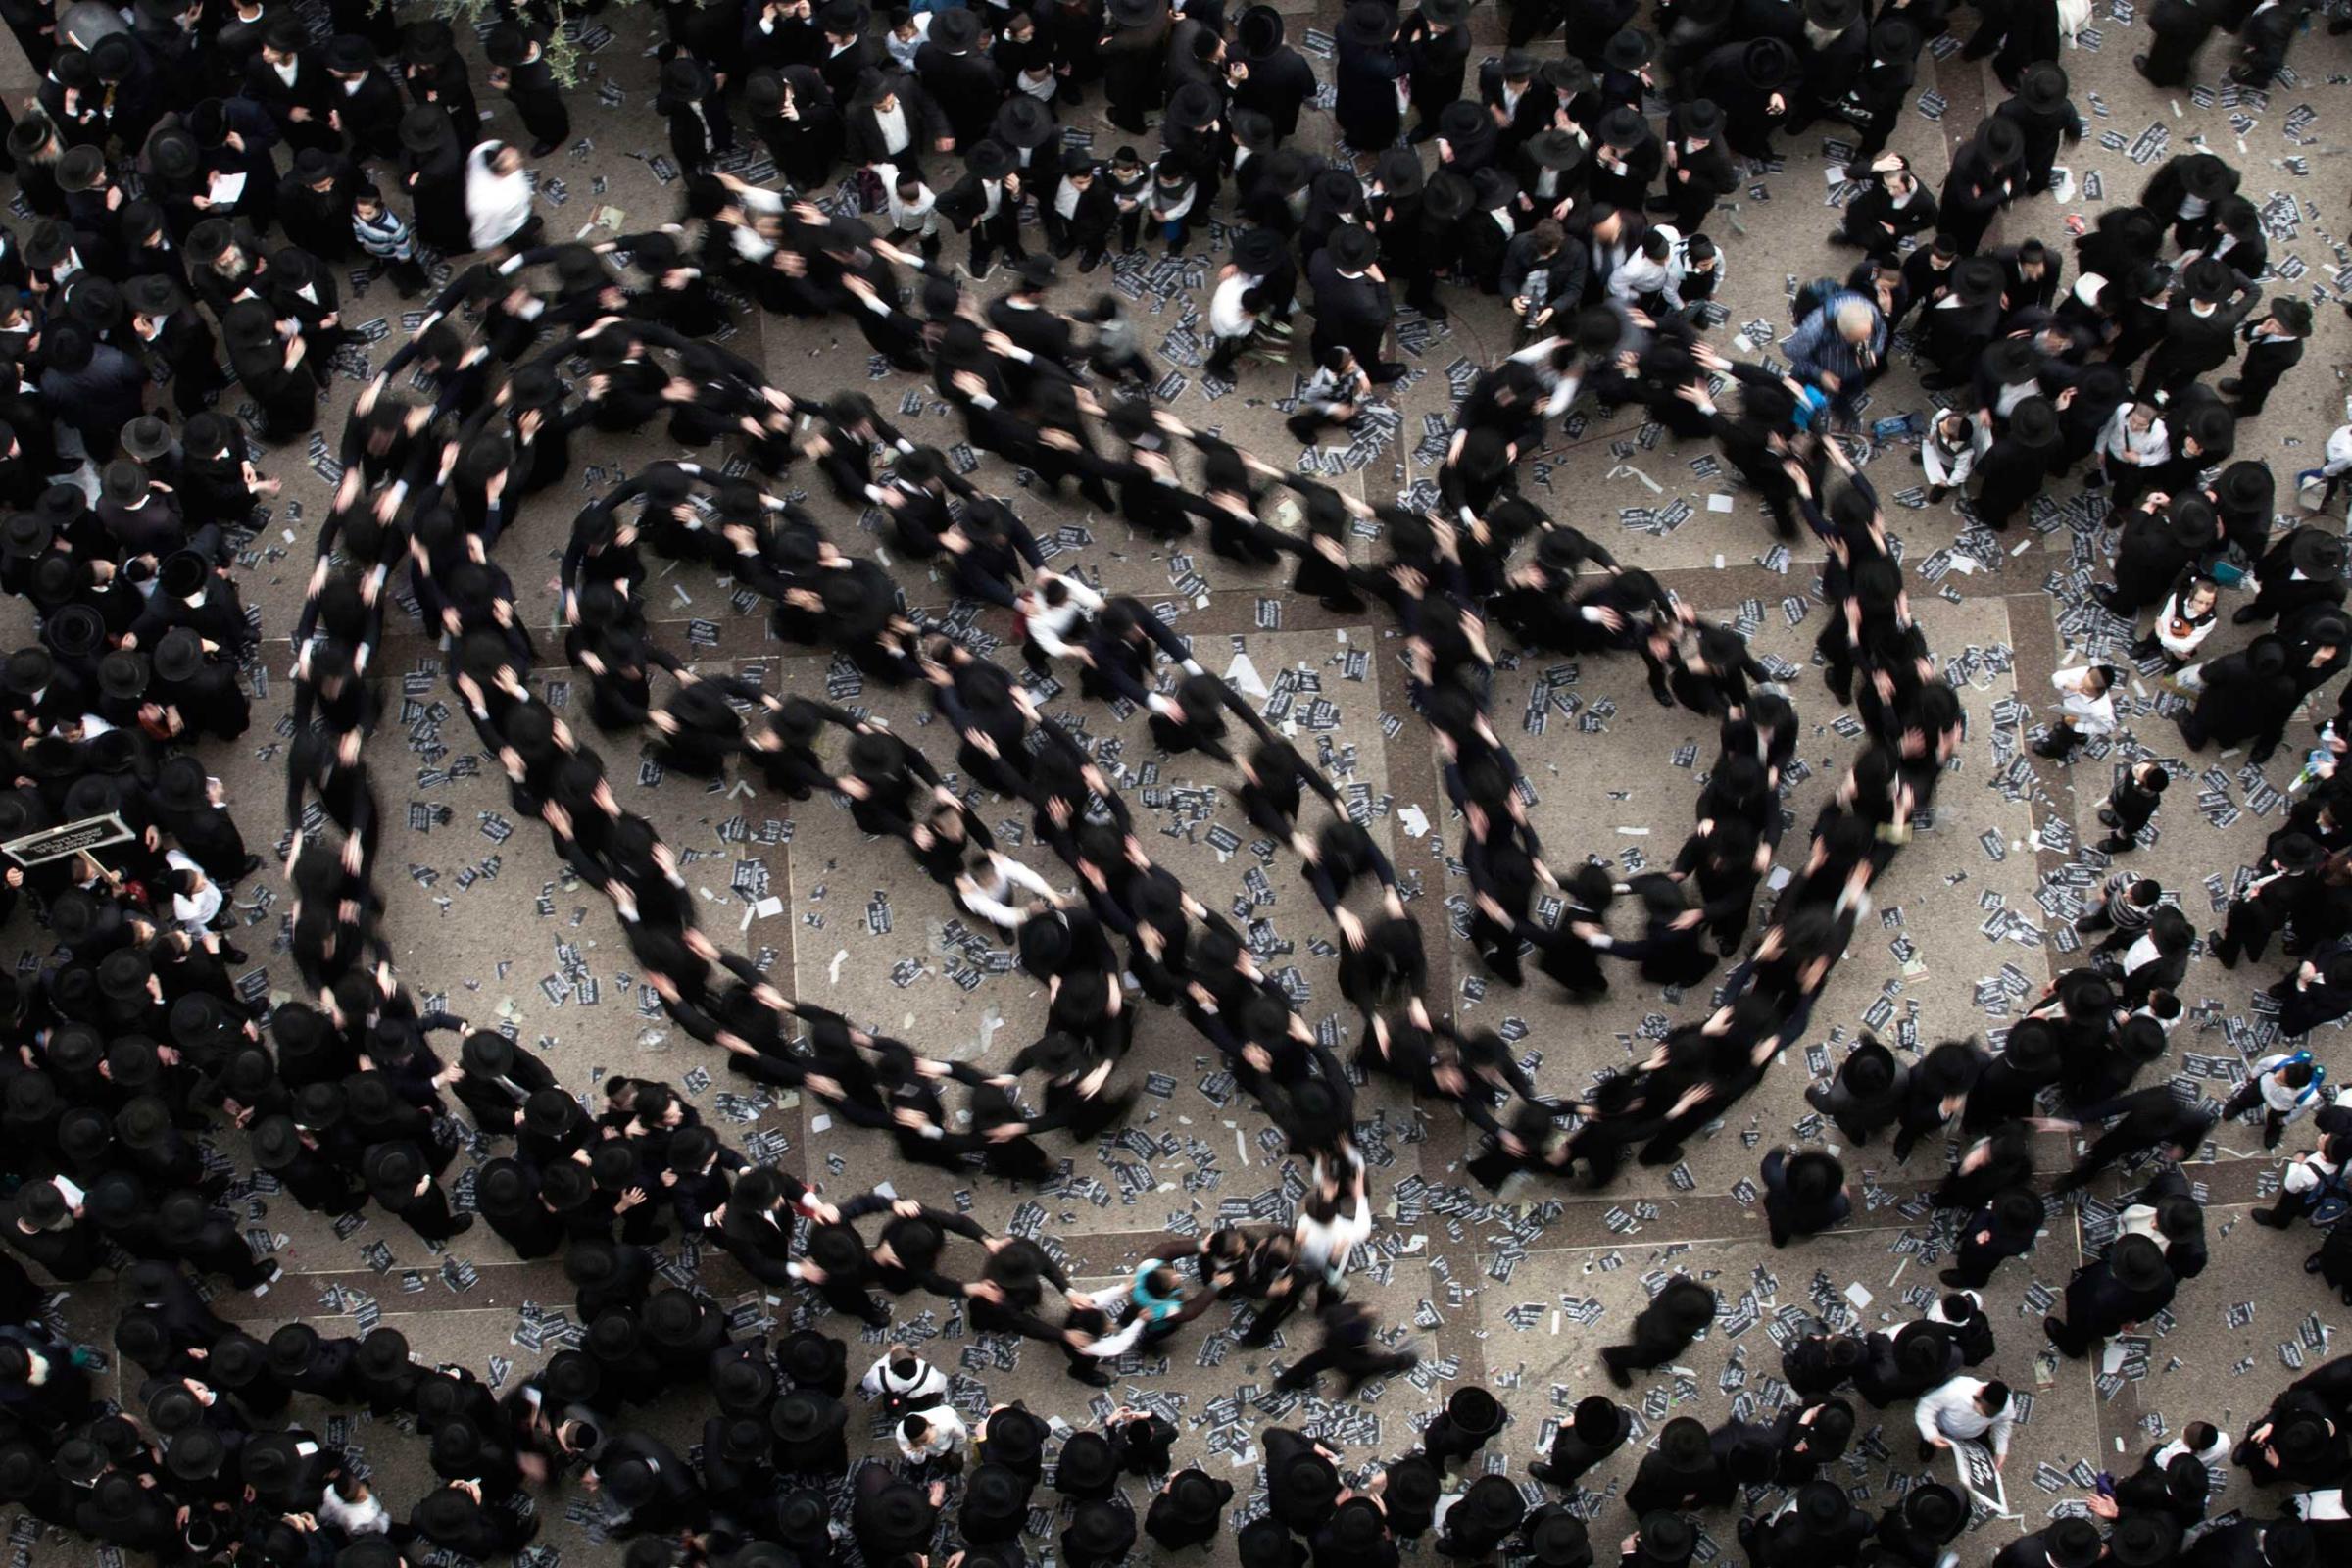 Ultra-Orthodox Jews dance as they gather for a mass prayer in protest to the government's army conscription laws in Jerusalem, March 2, 2014.